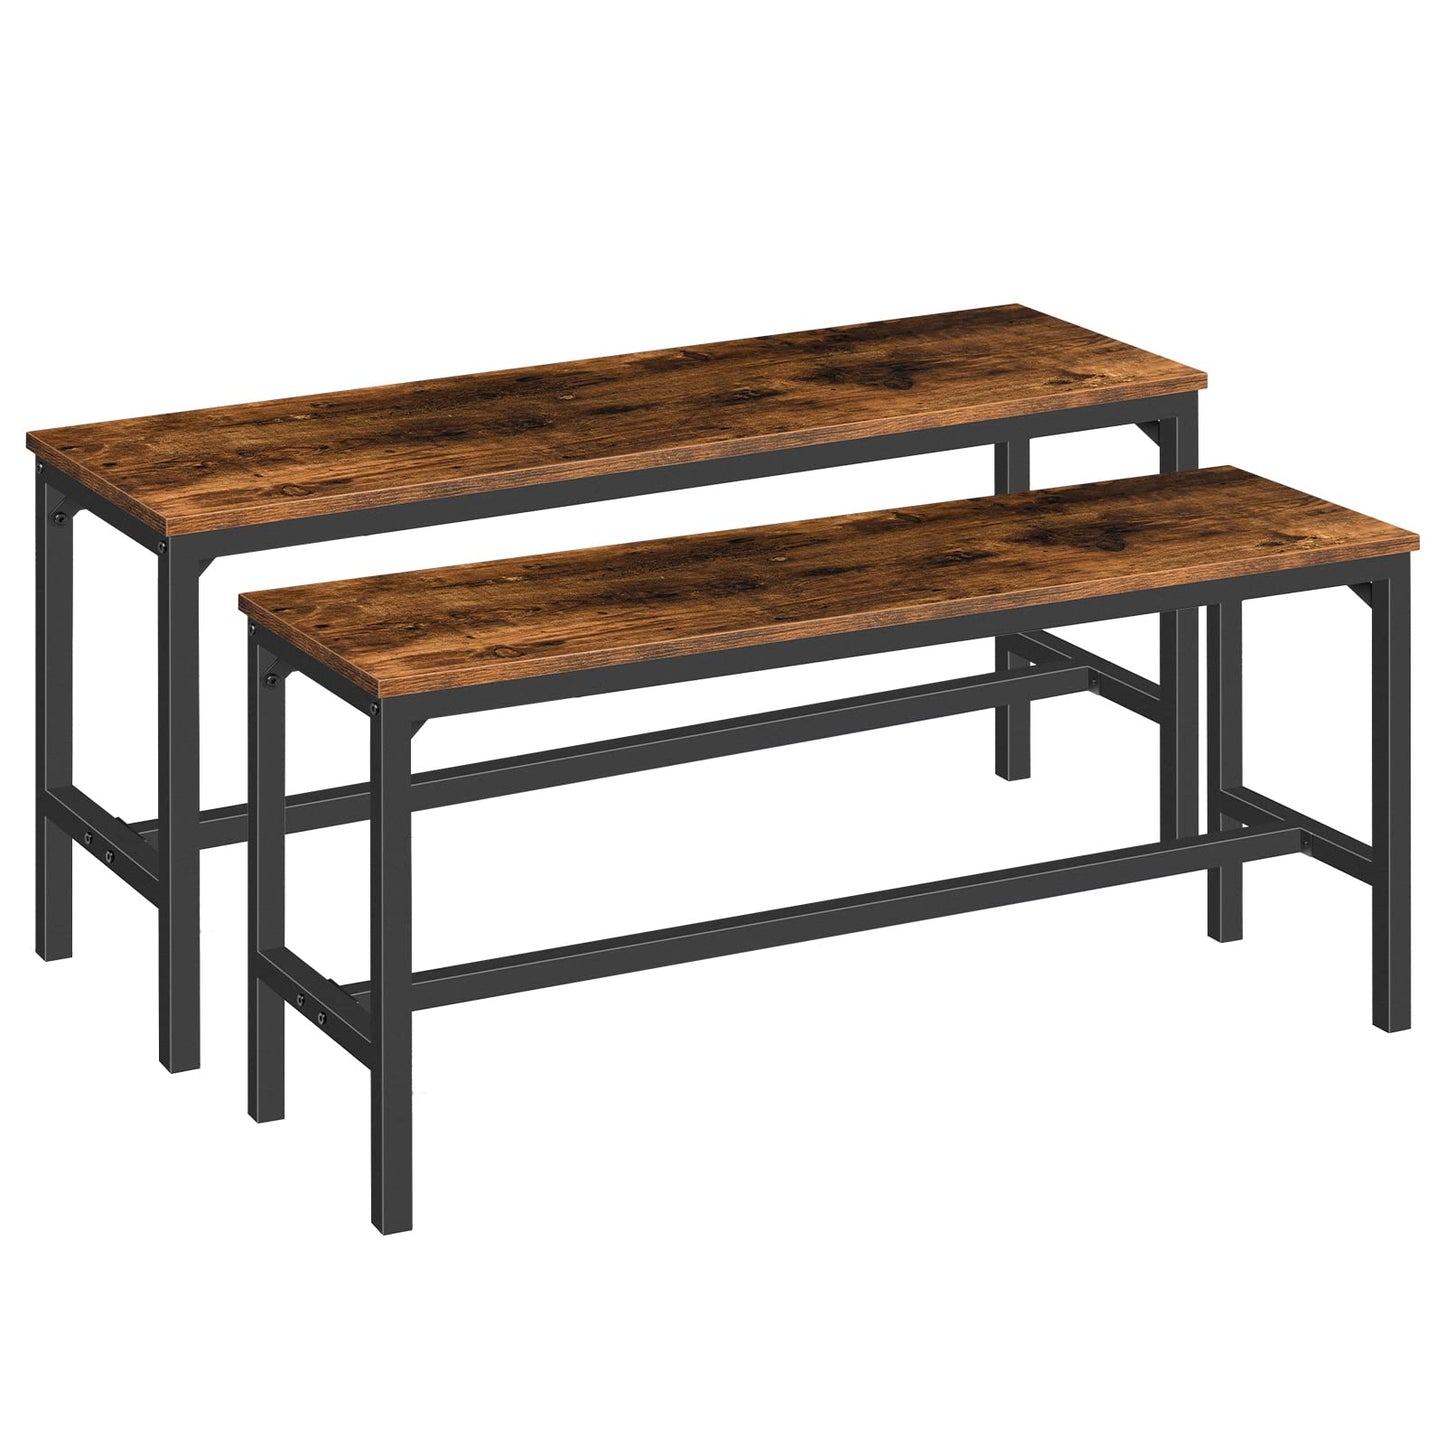 HOOBRO Dining Benches, Pair of 2 Kitchen Benches, Industrial Table Benches, Wooden Indoor Benches, Durable and Stable, for Dining Room, Kitchen,